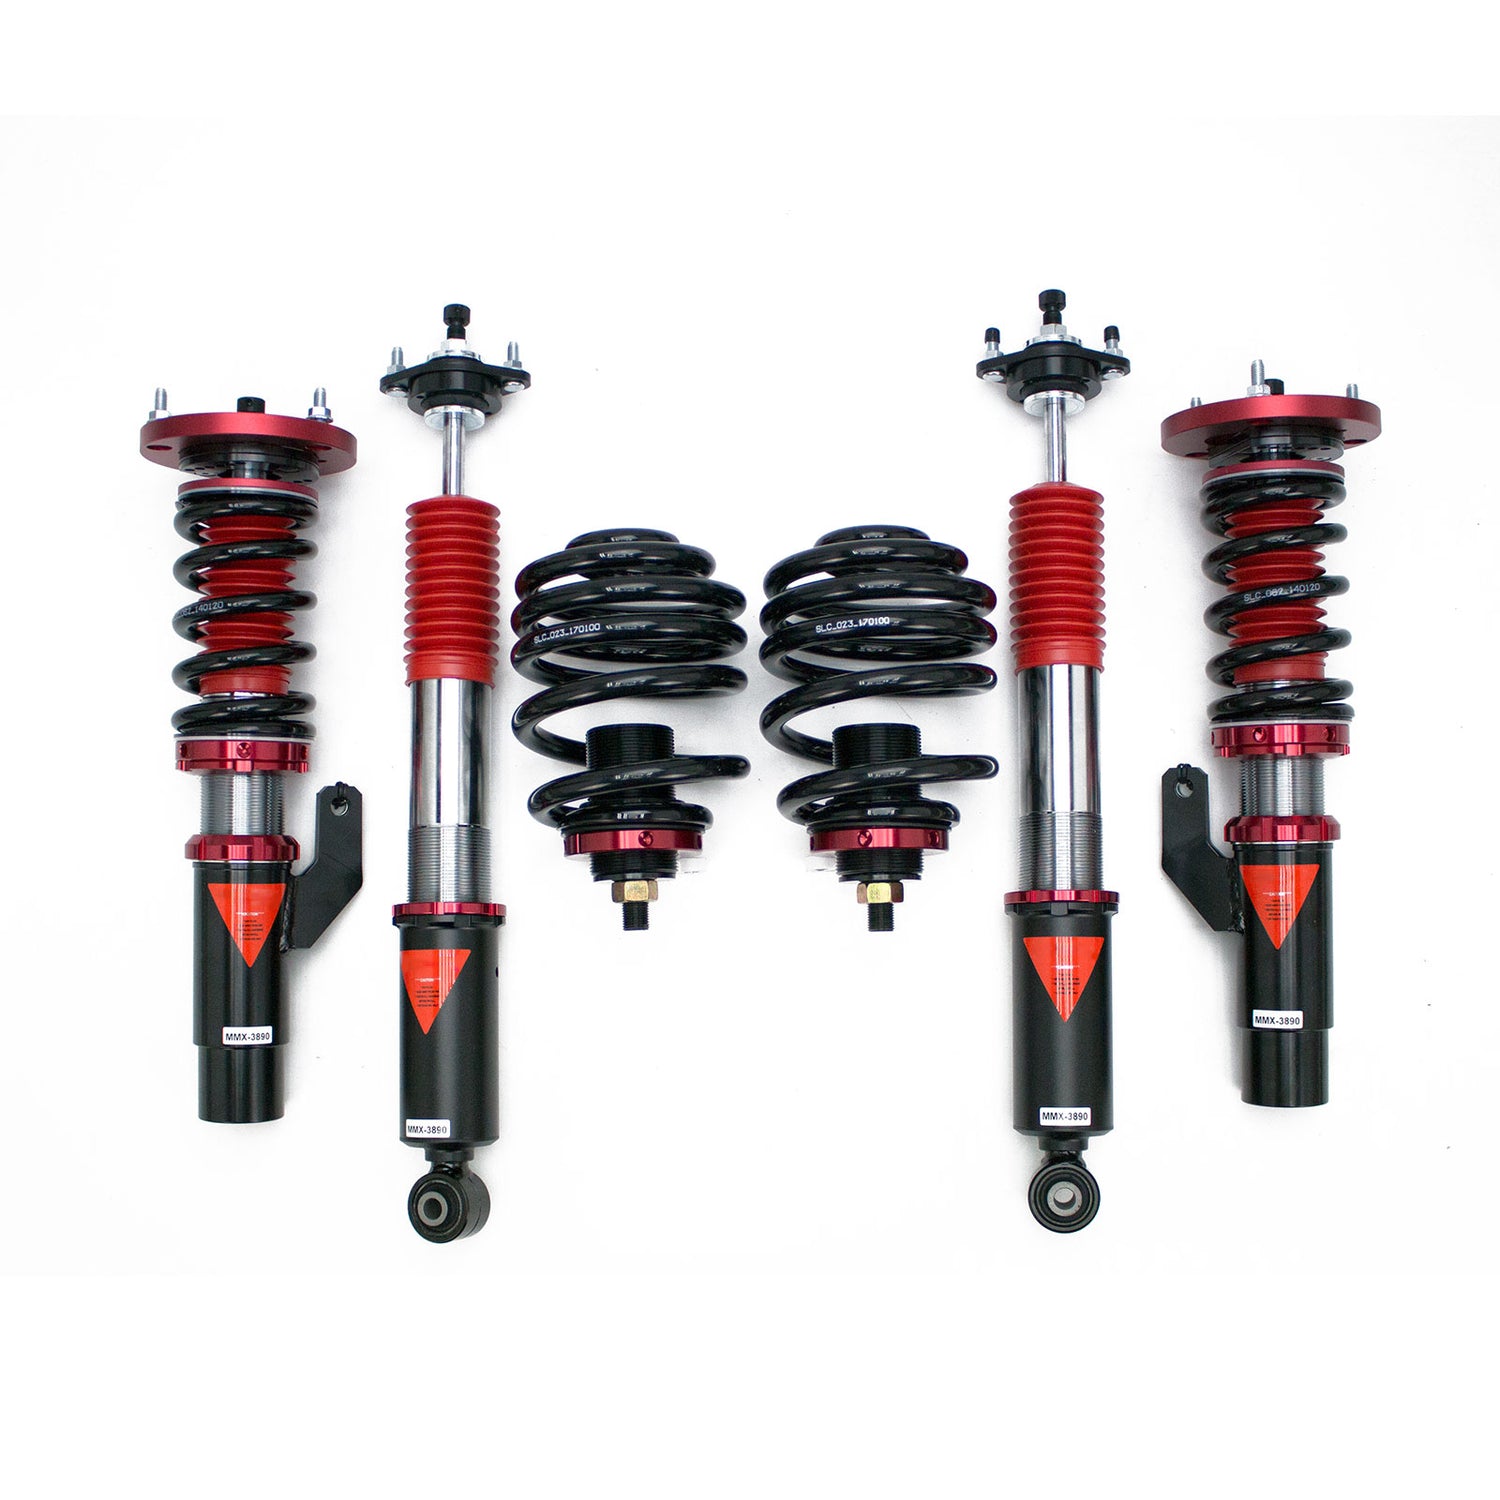 MMX3890 MAXX Coilovers Lowering Kit, Fully Adjustable, Ride Height, 40 Clicks Rebound Settings, BMW 3-Series(E46) AWD 2000-05